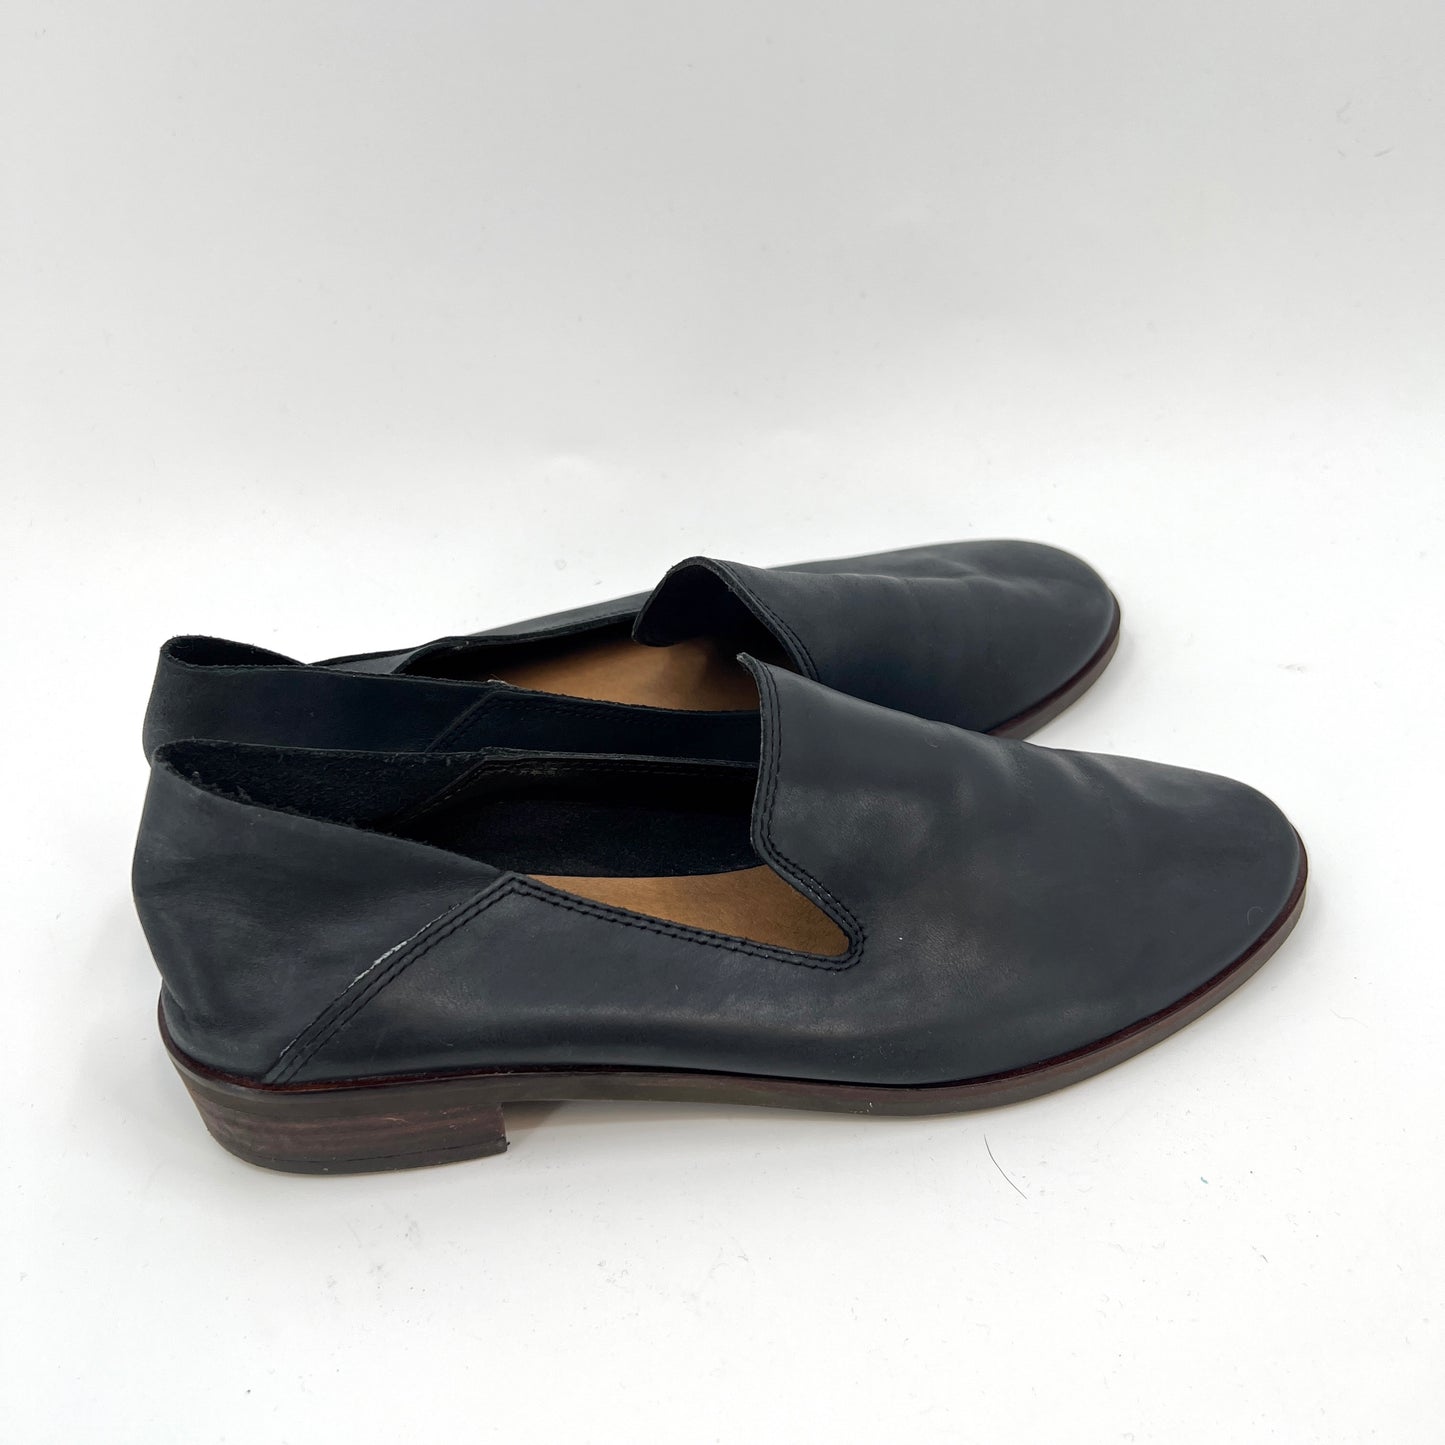 SOLD. Lucky Brand Leather Flats 7US